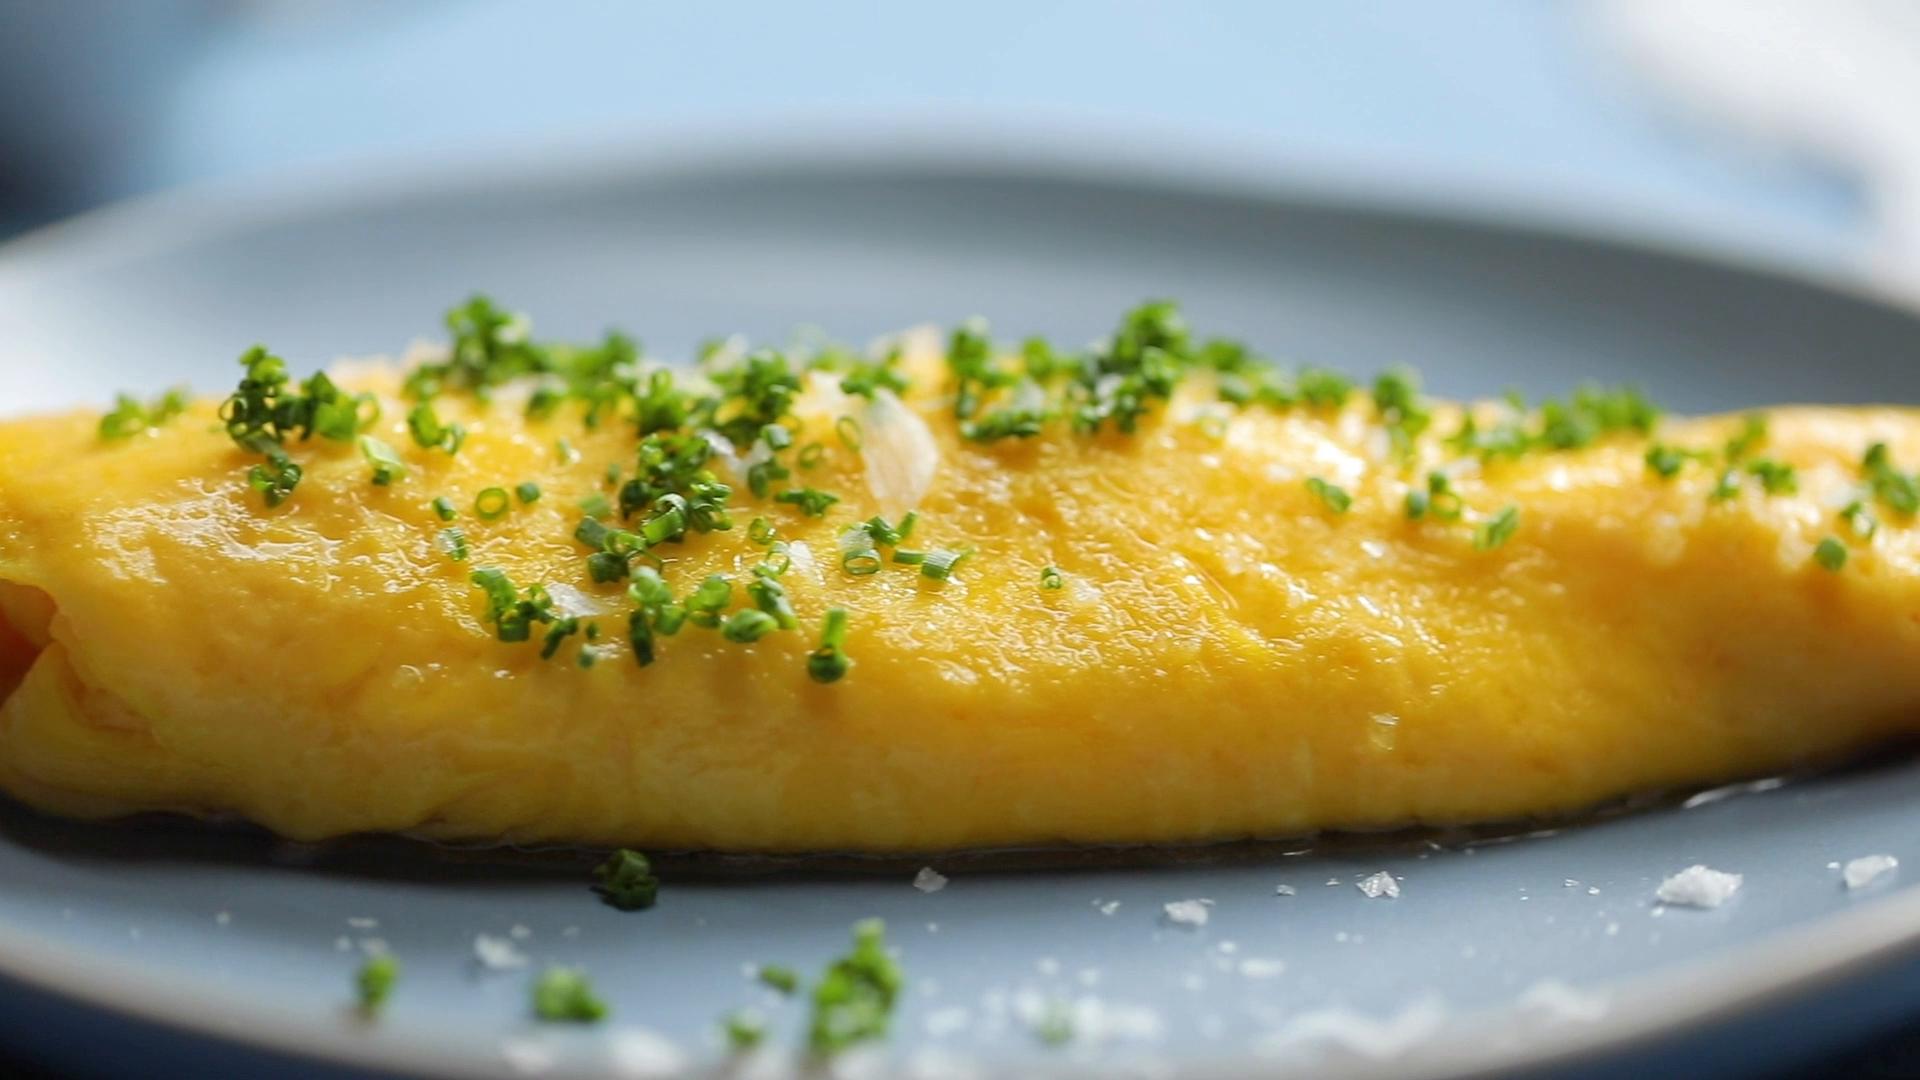 How to Make a French Omelette